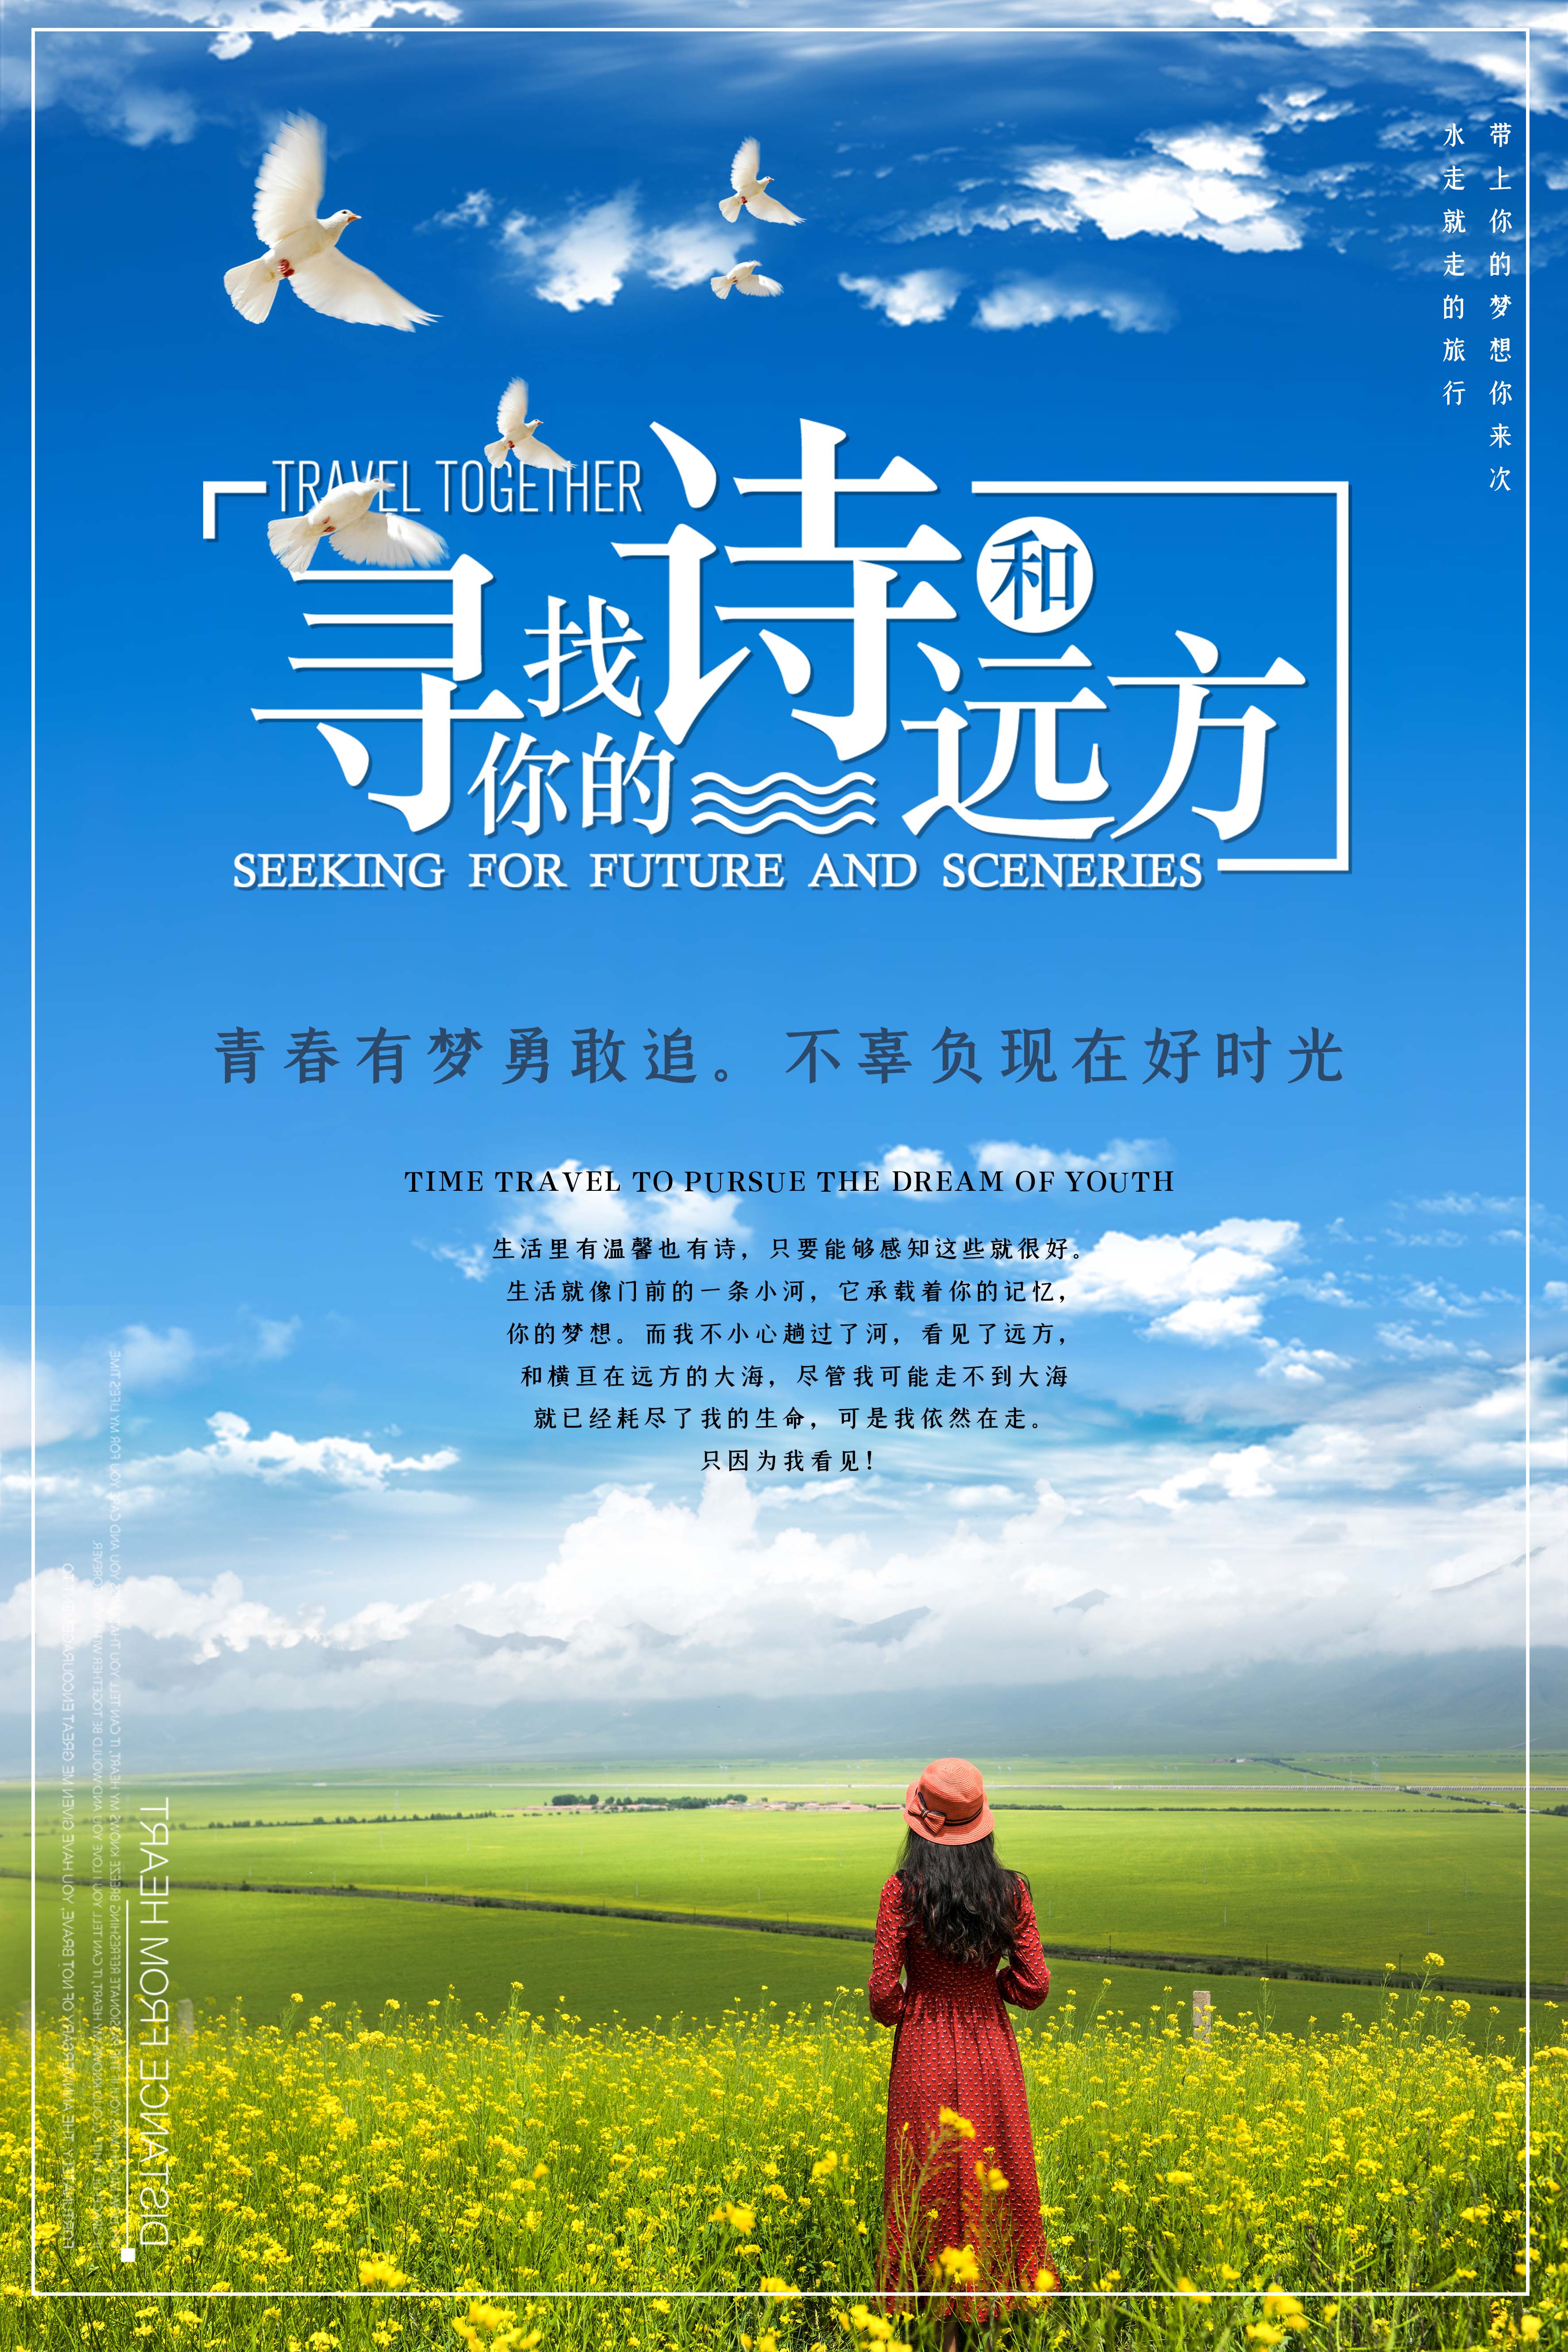 Find Yourself 去远方发现自己 by Fei Yong 费勇 | Goodreads